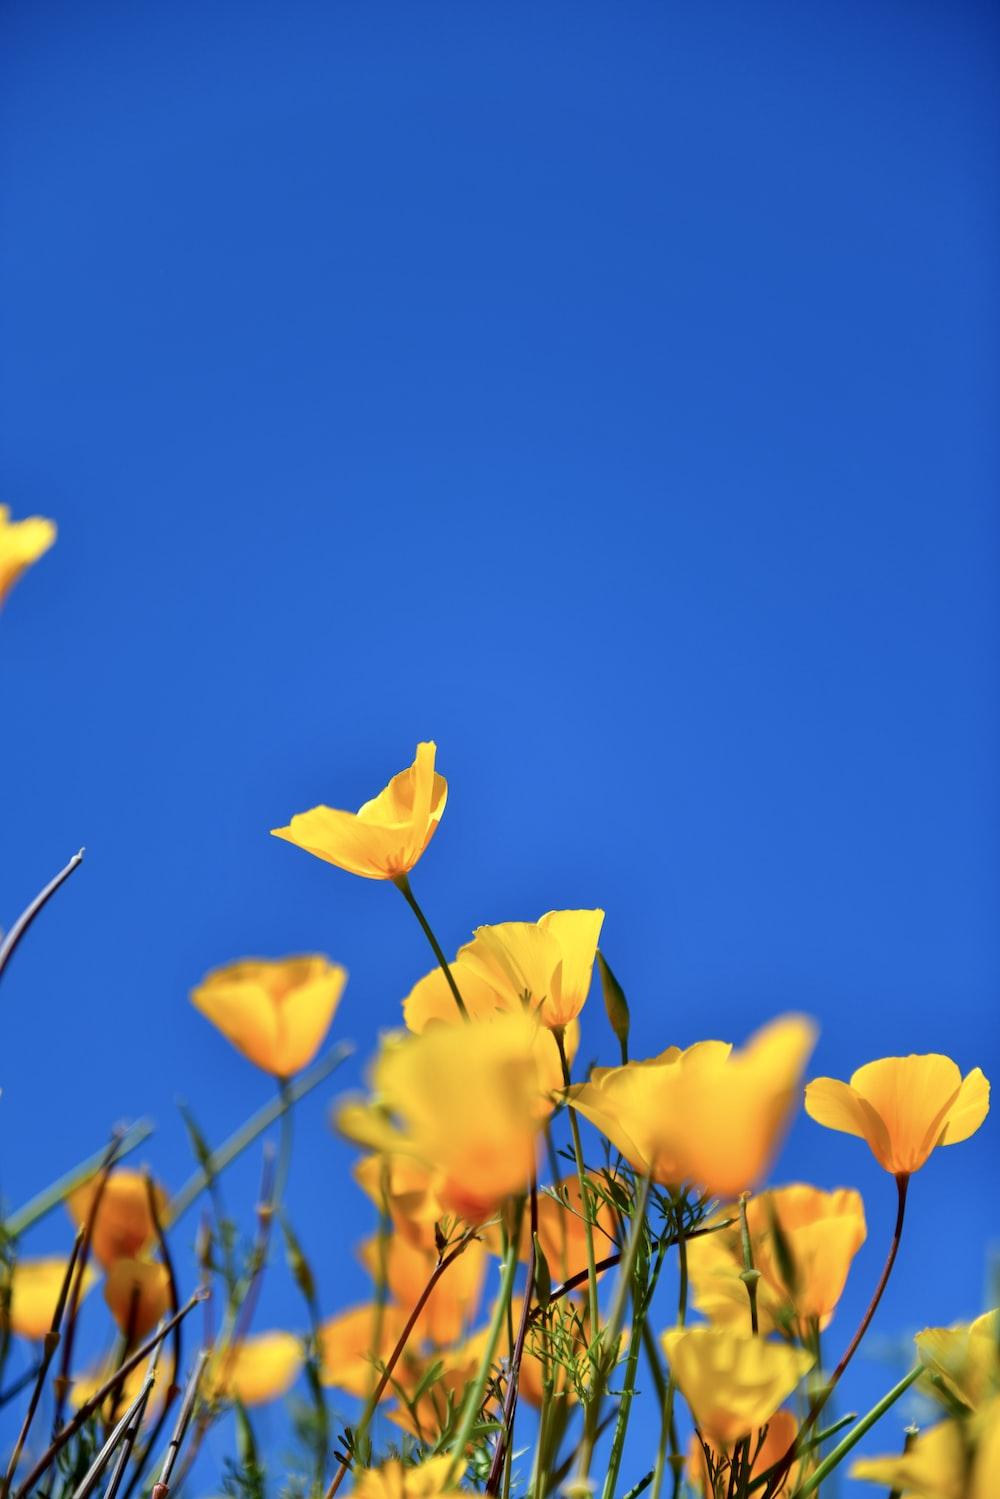 A Field Of Yellow Flowers With Blue Sky In The Background Photo